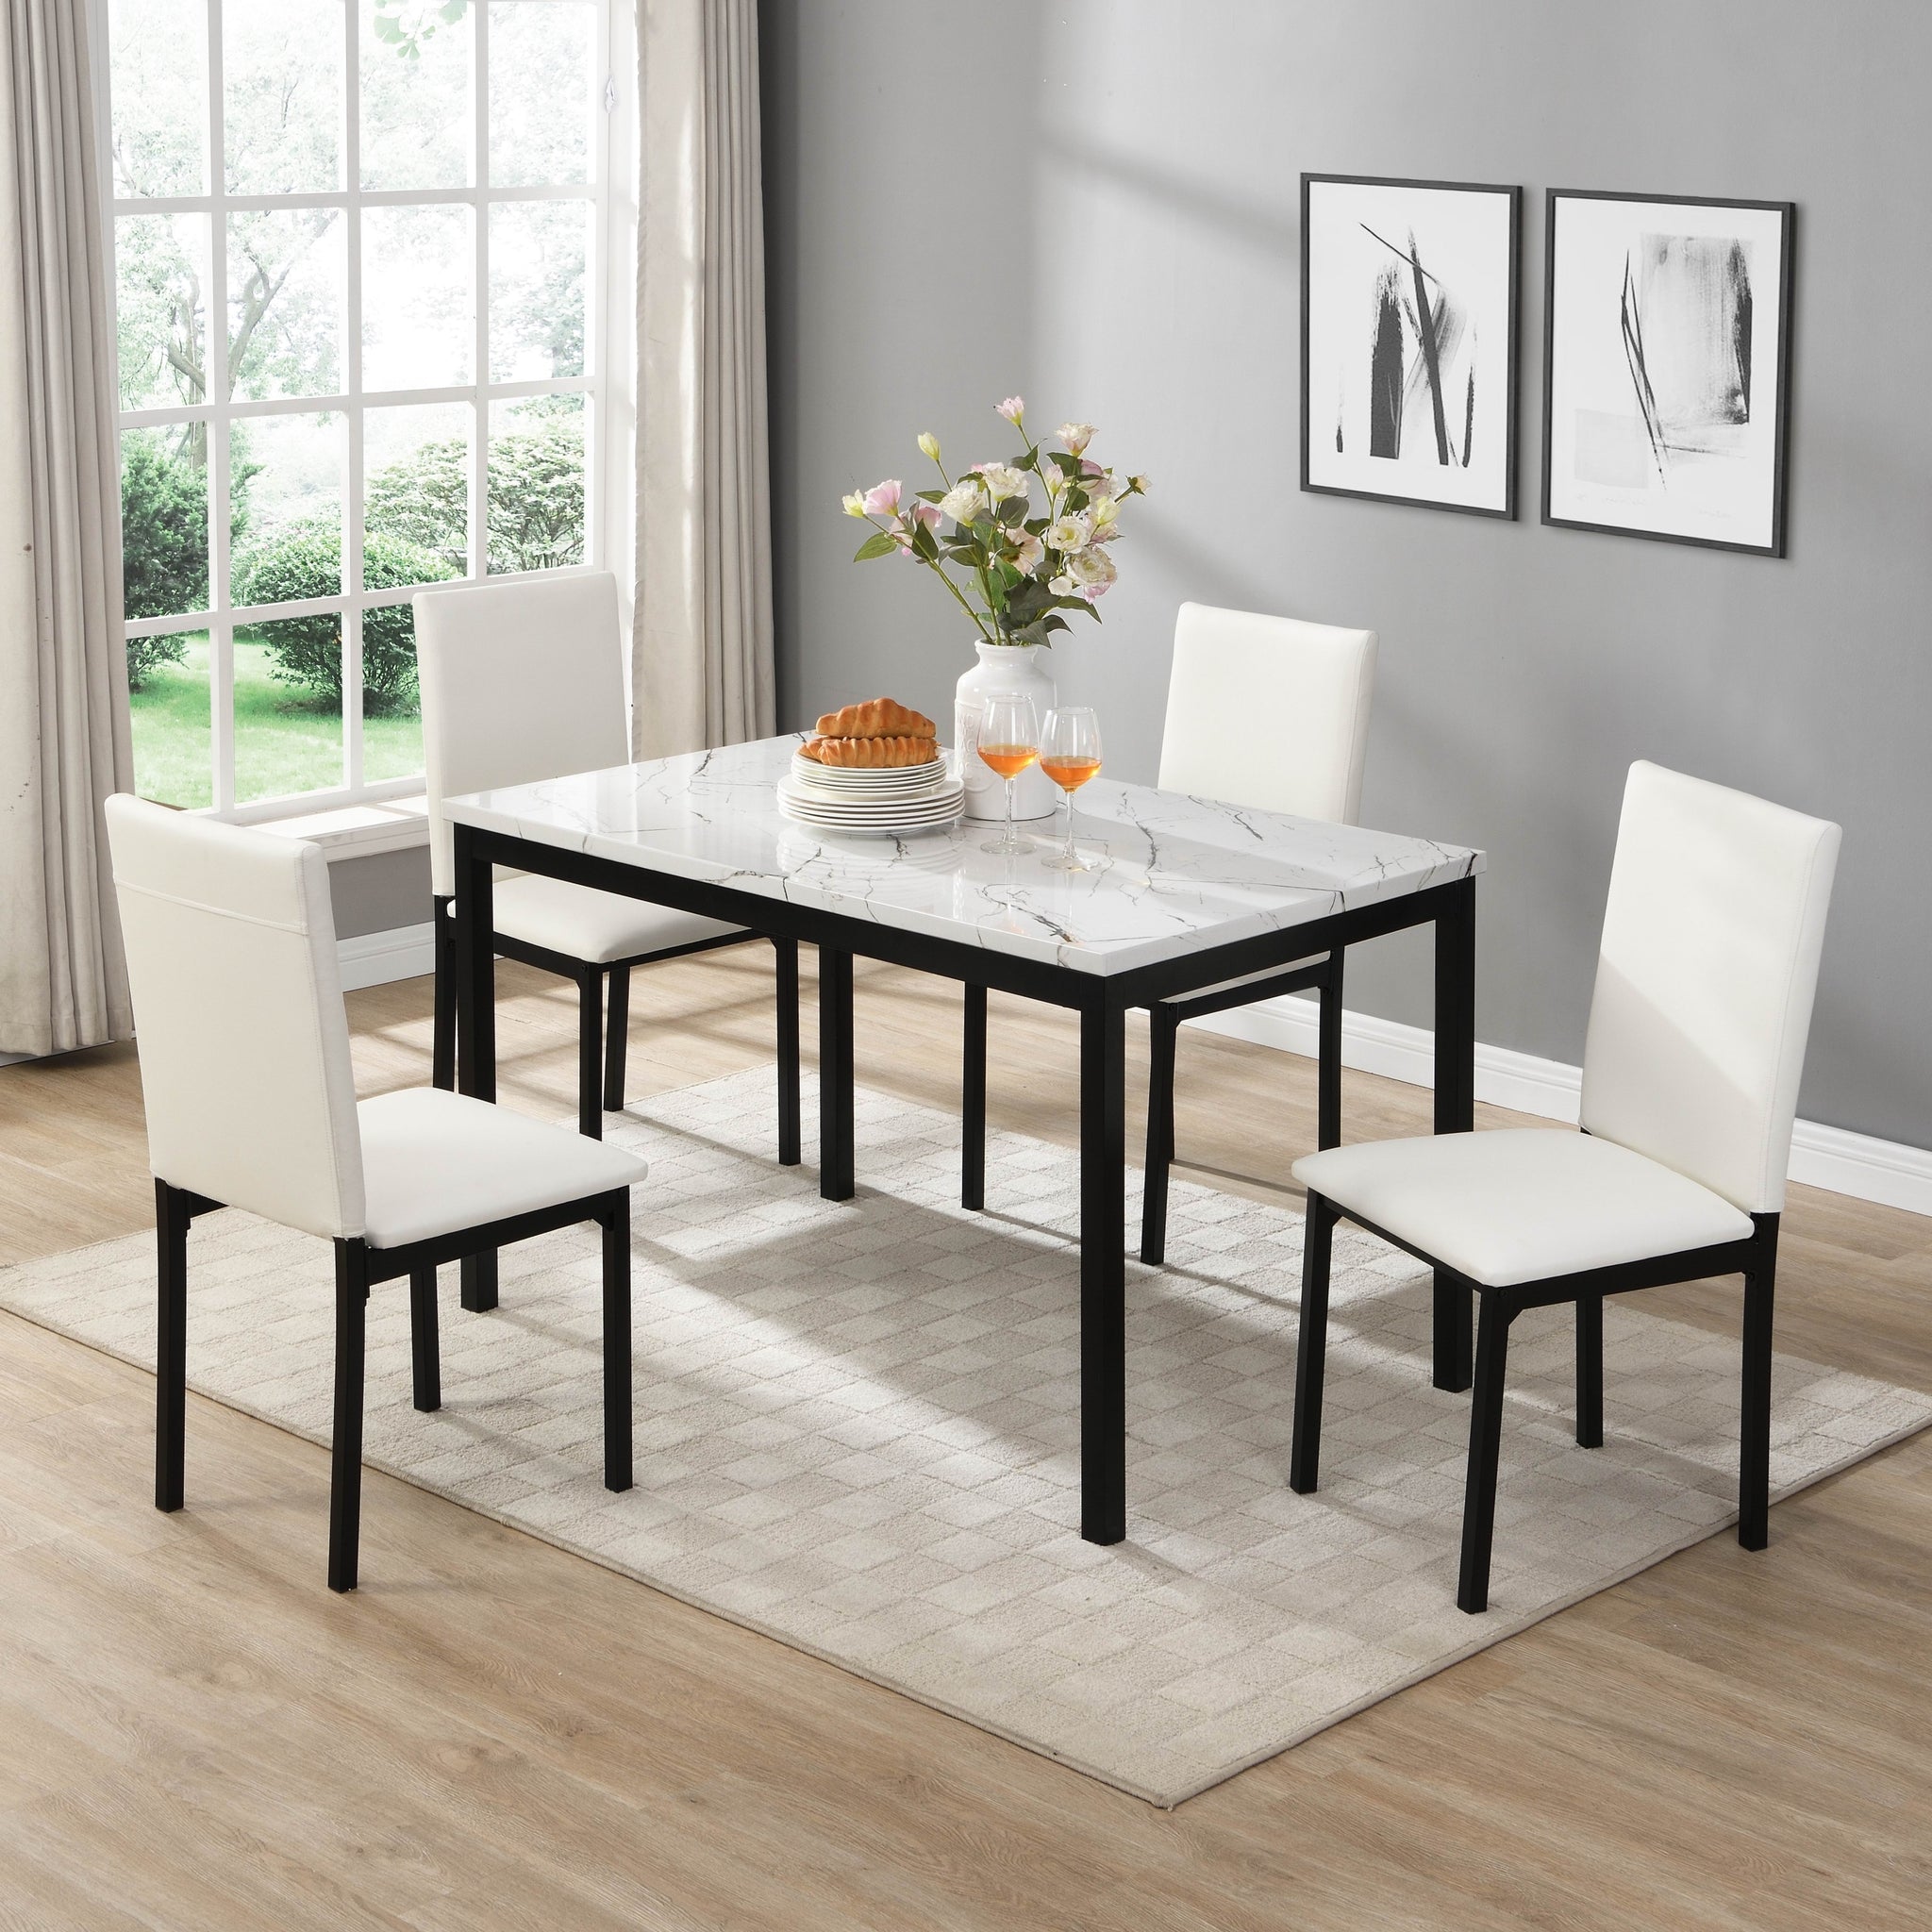 Dining 5pc Set White Faux Marble Top Table and 4x Side white-dining room-dining table with chair-metal